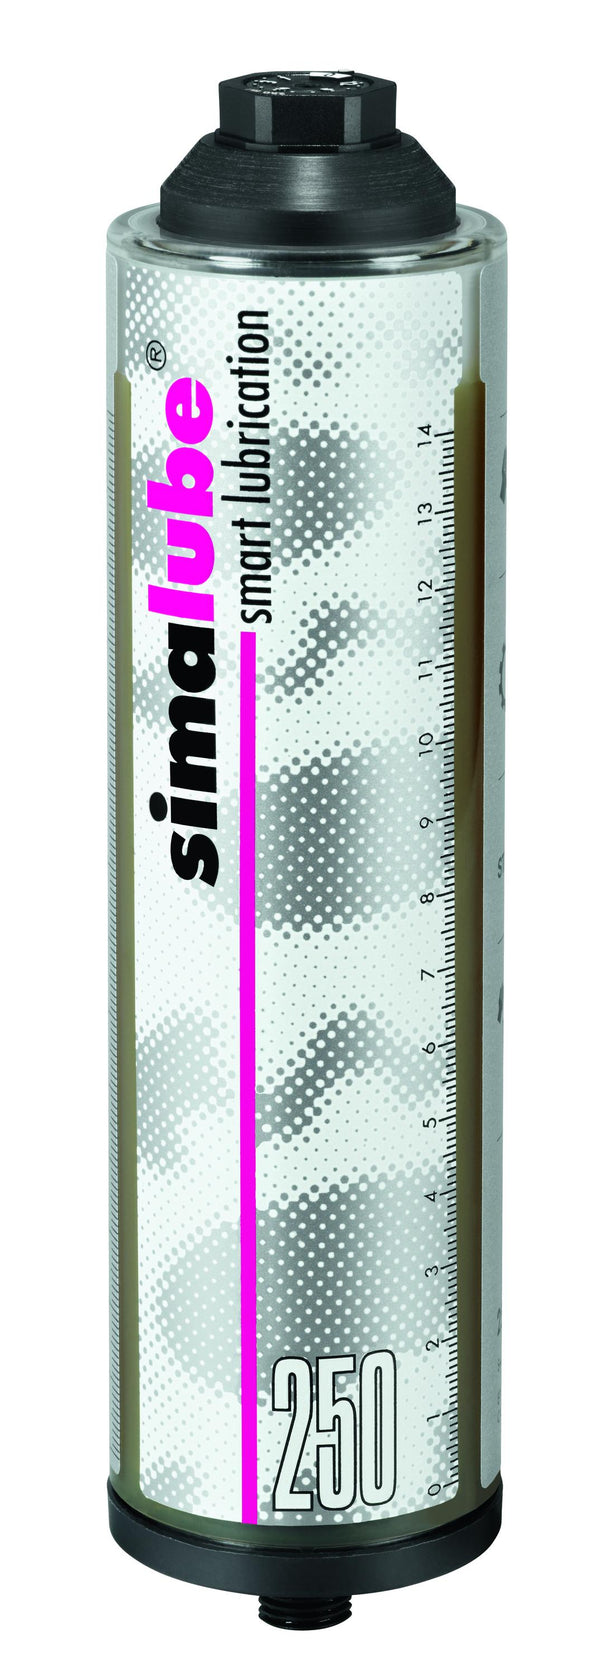 Simalube lubrication cartridge filled with liquid grease 250ml